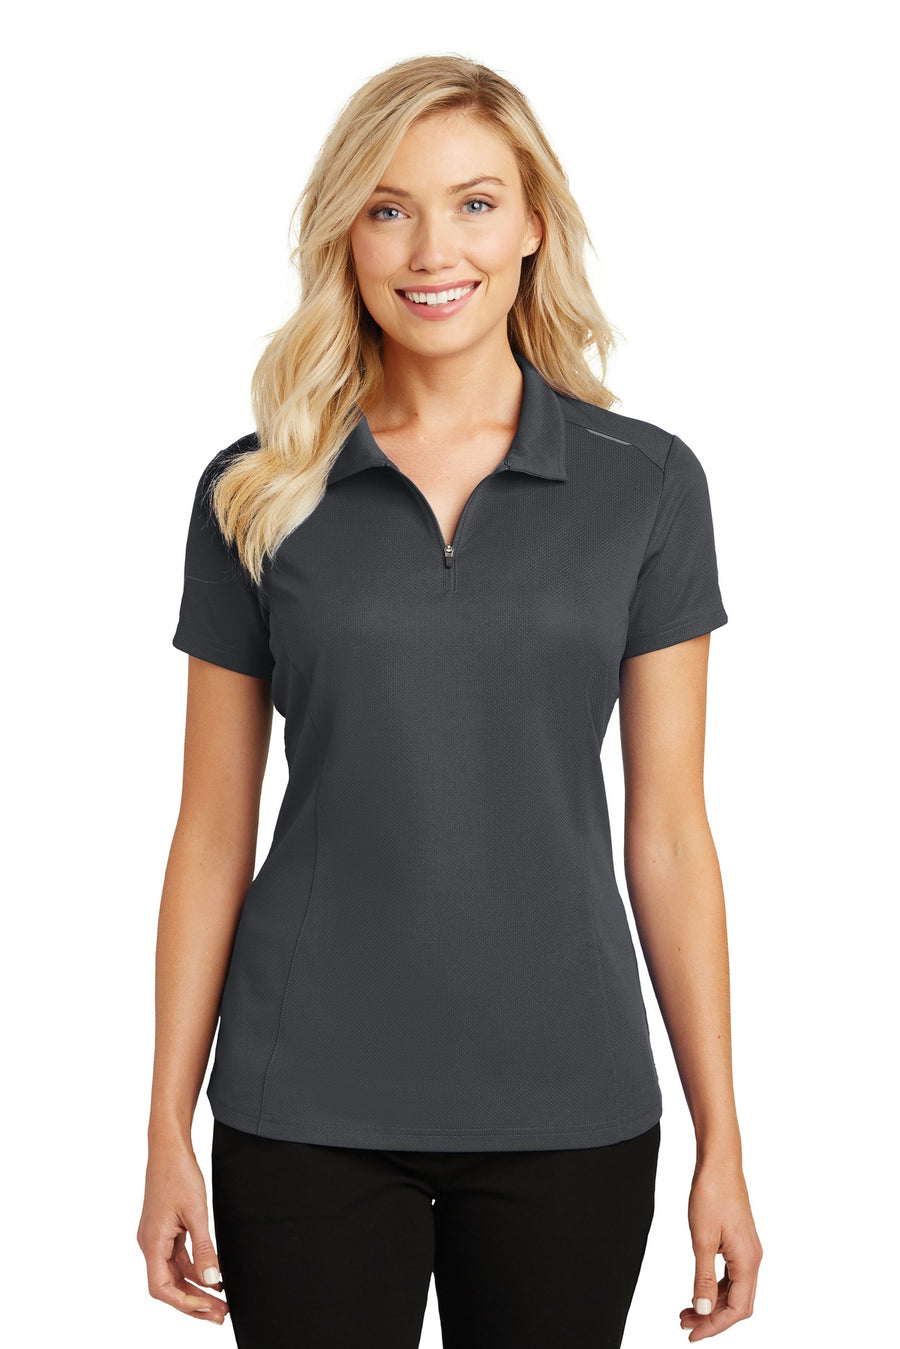 Port Authority Pinpoint Mesh Zip Polo.